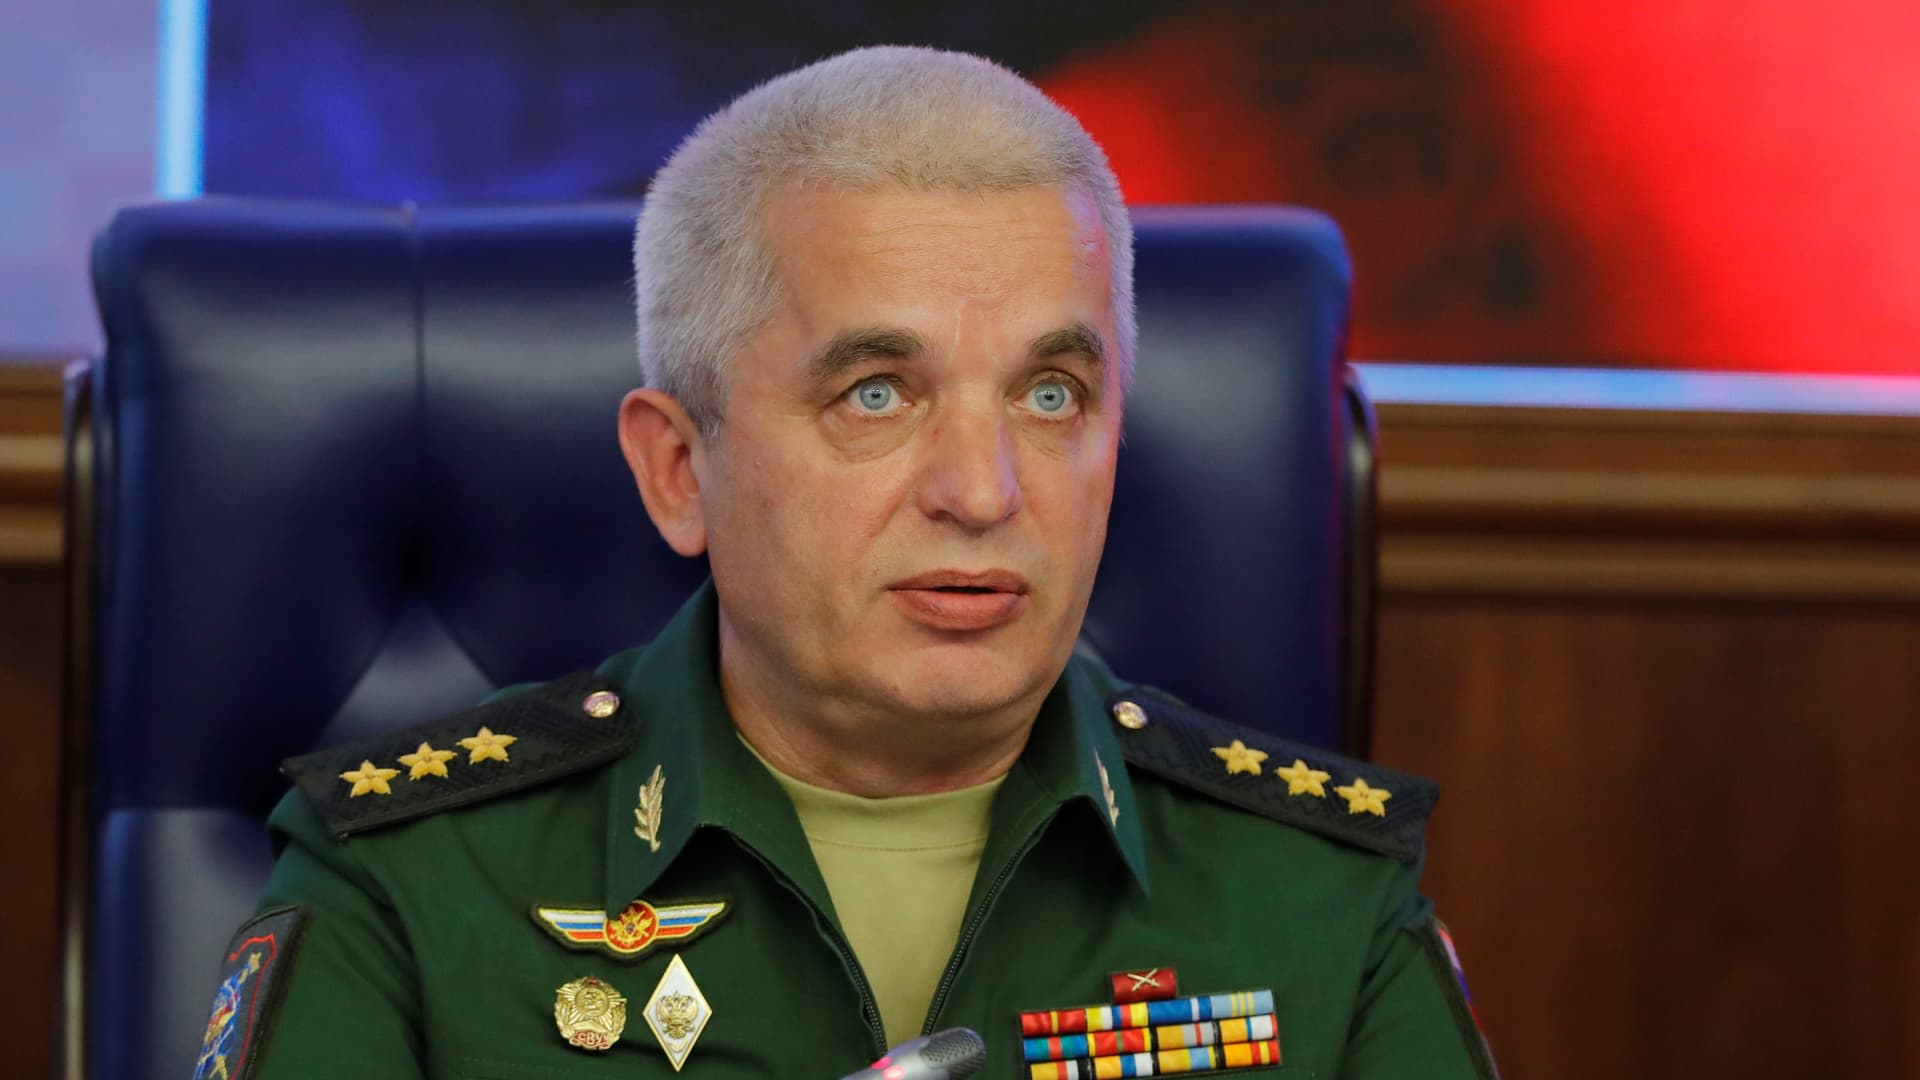 Chief of the National Centre for State Defense Control Colonel-General Mikhail Mizintsev speaks during working meeting of the Interdepartmental Coordination Unit of the Ministry of Defense and the Ministry of Foreign Affairs of Russia on the return of refugees to Syria at the Russian National Defense Management Center in Moscow Russia on July 20, 2018.